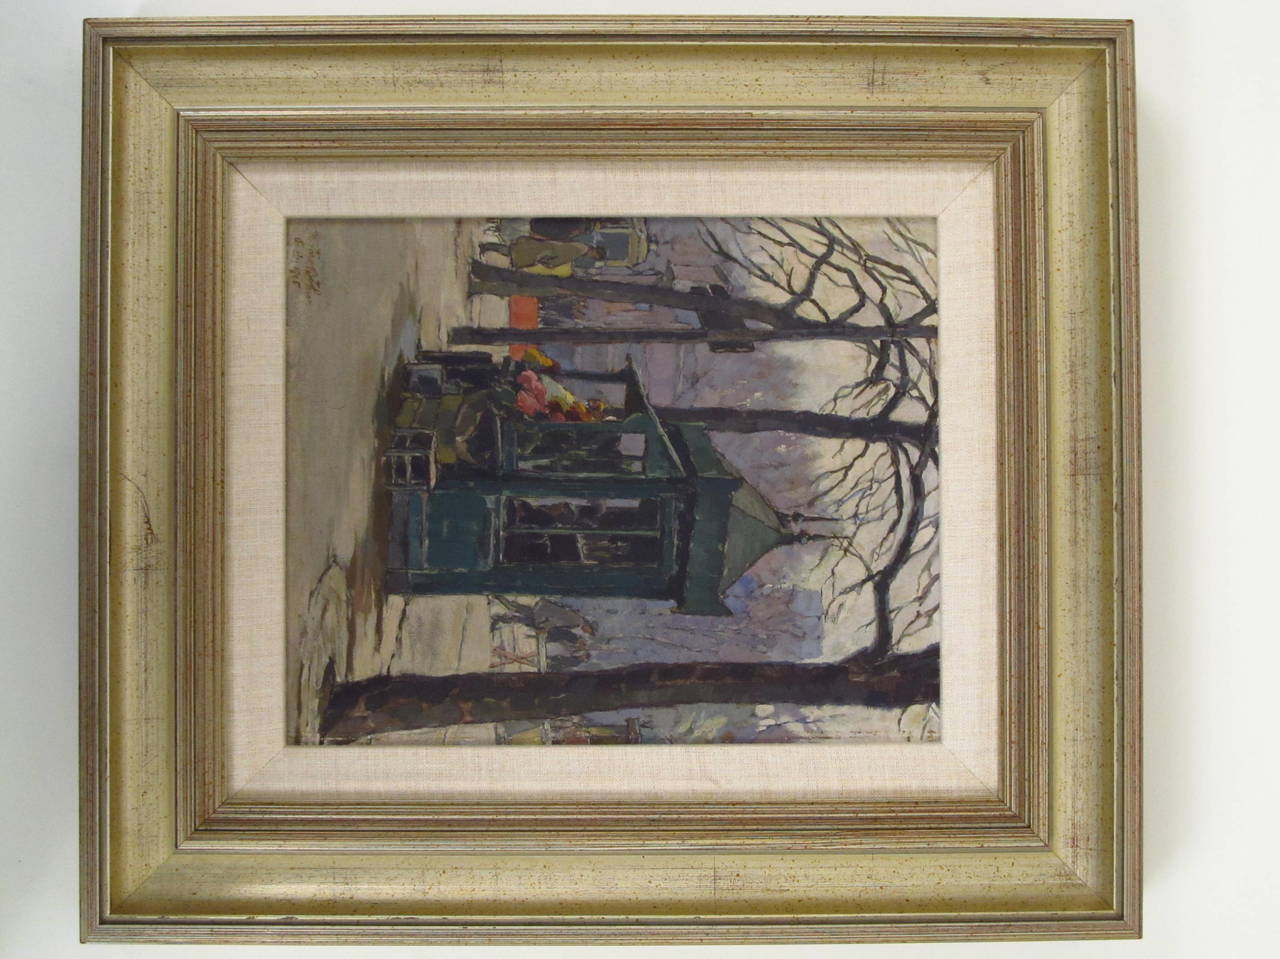 This is a charming little painting of urban life in 1925, Europe, capturing the atmosphere of autumn with the cloudy sky and the bare trees. His choice of palette emphasizing the contrast of purple and green is very pleasing. The medium is oil on